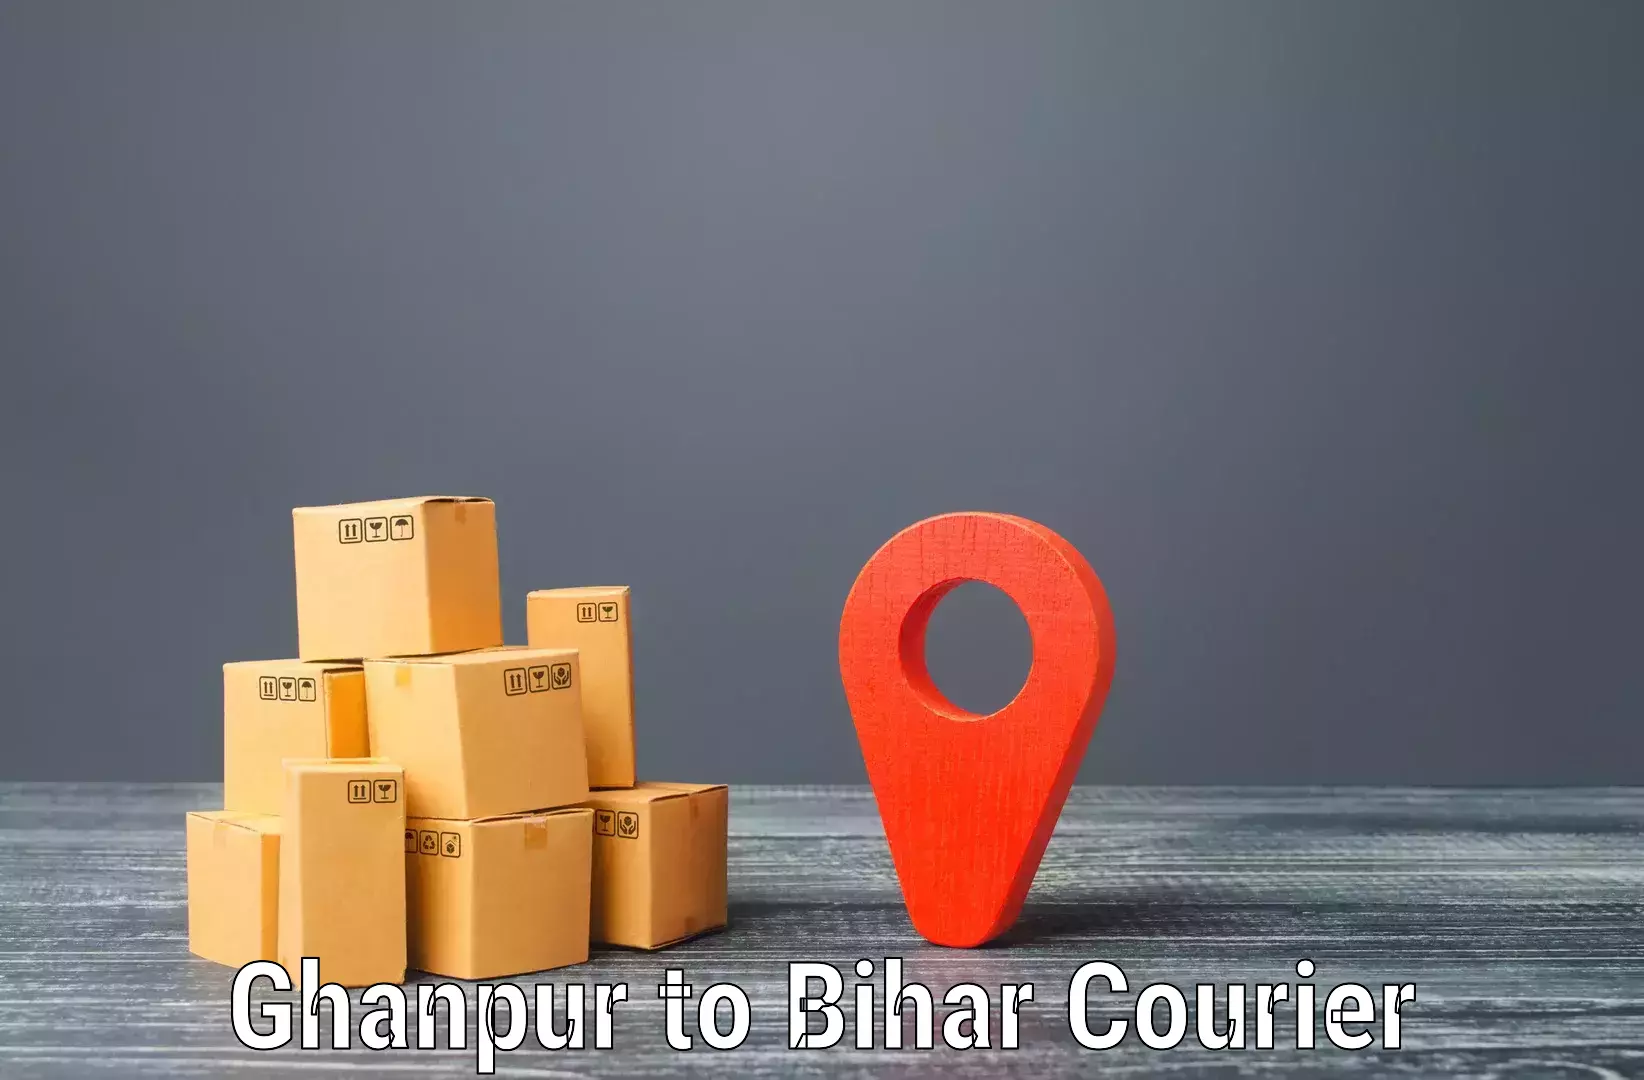 Trackable shipping service Ghanpur to Katoria